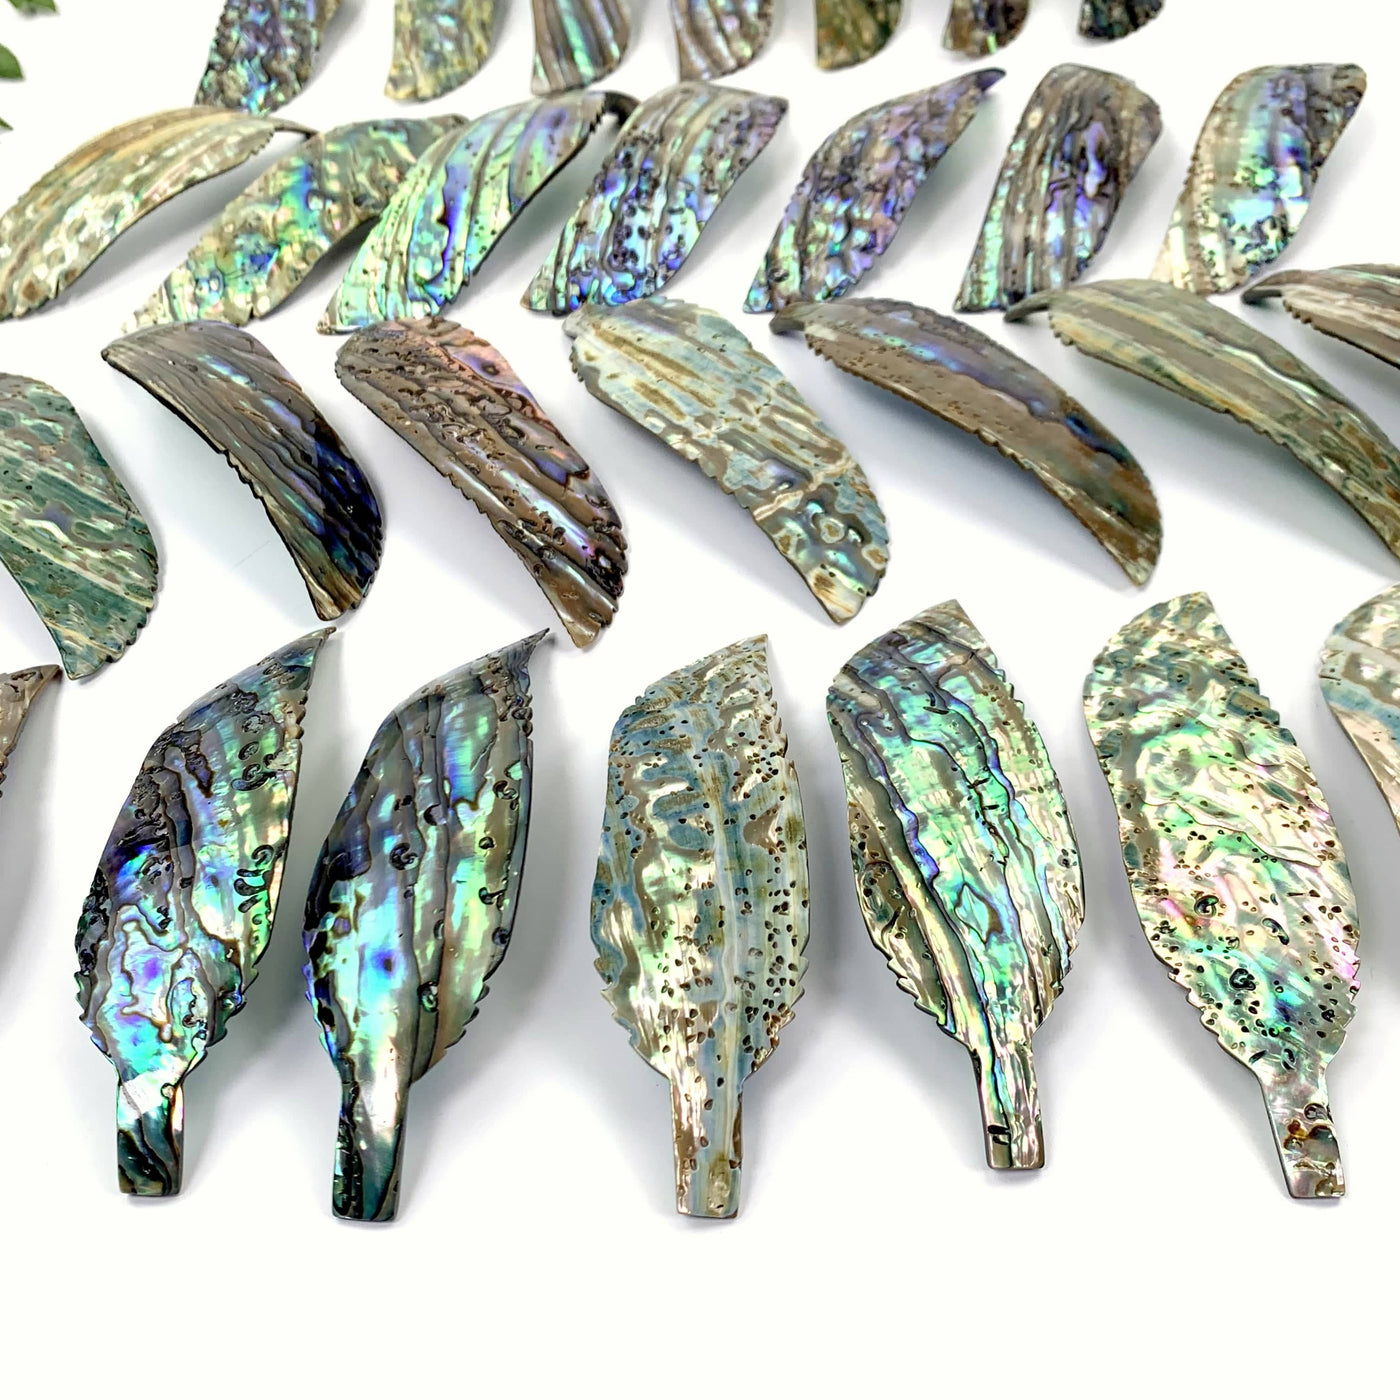 A close up of multiple Abalone - Cut Feather Shape displaying the back side.